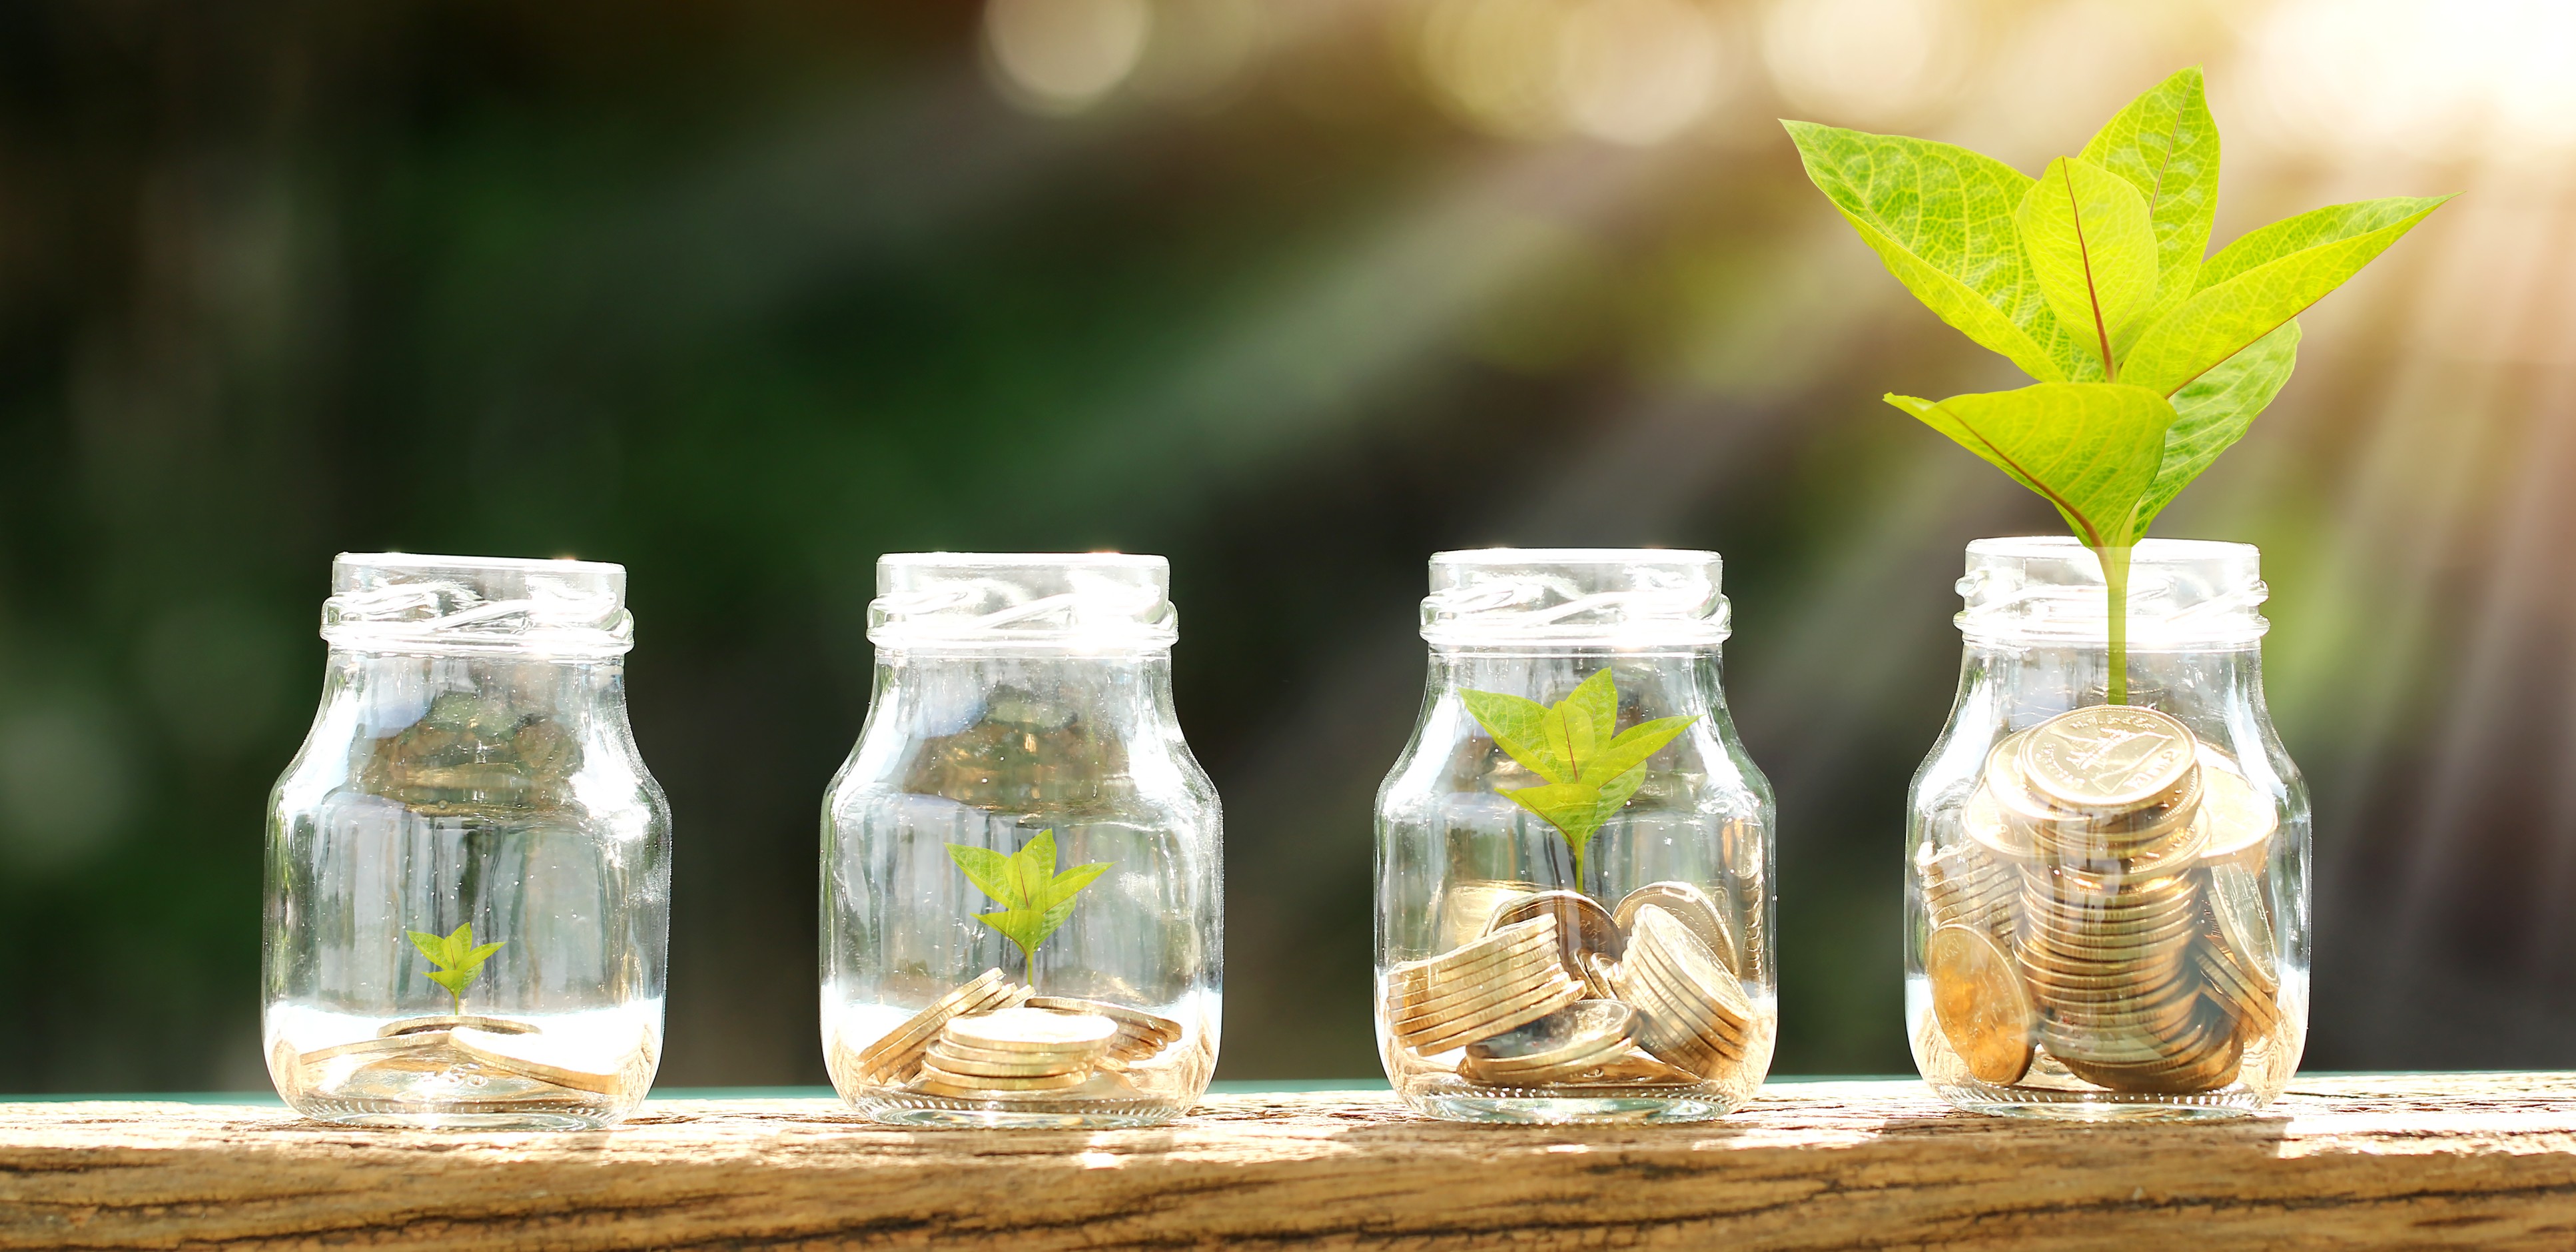 An image of four mason jars outdoors. Moving left to right, each jar has progression more coins and a larger plant in it.